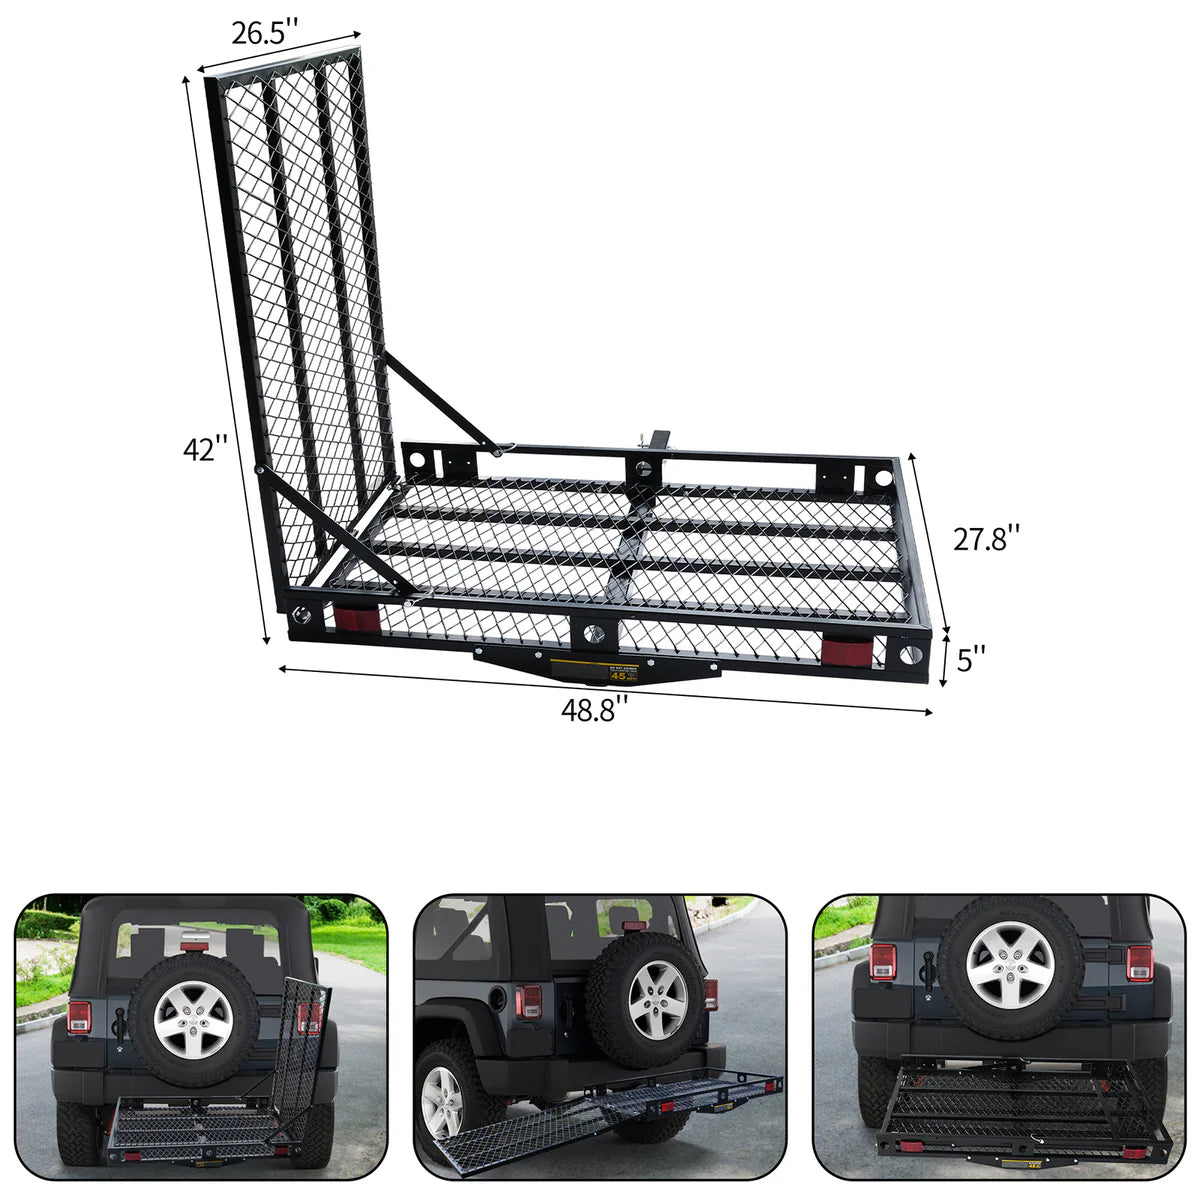 48.8"x 27.8" Hitch Mount Cargo Carrier Trailer Utility Basket with 42" Folding Wheelchair Ramp, Black